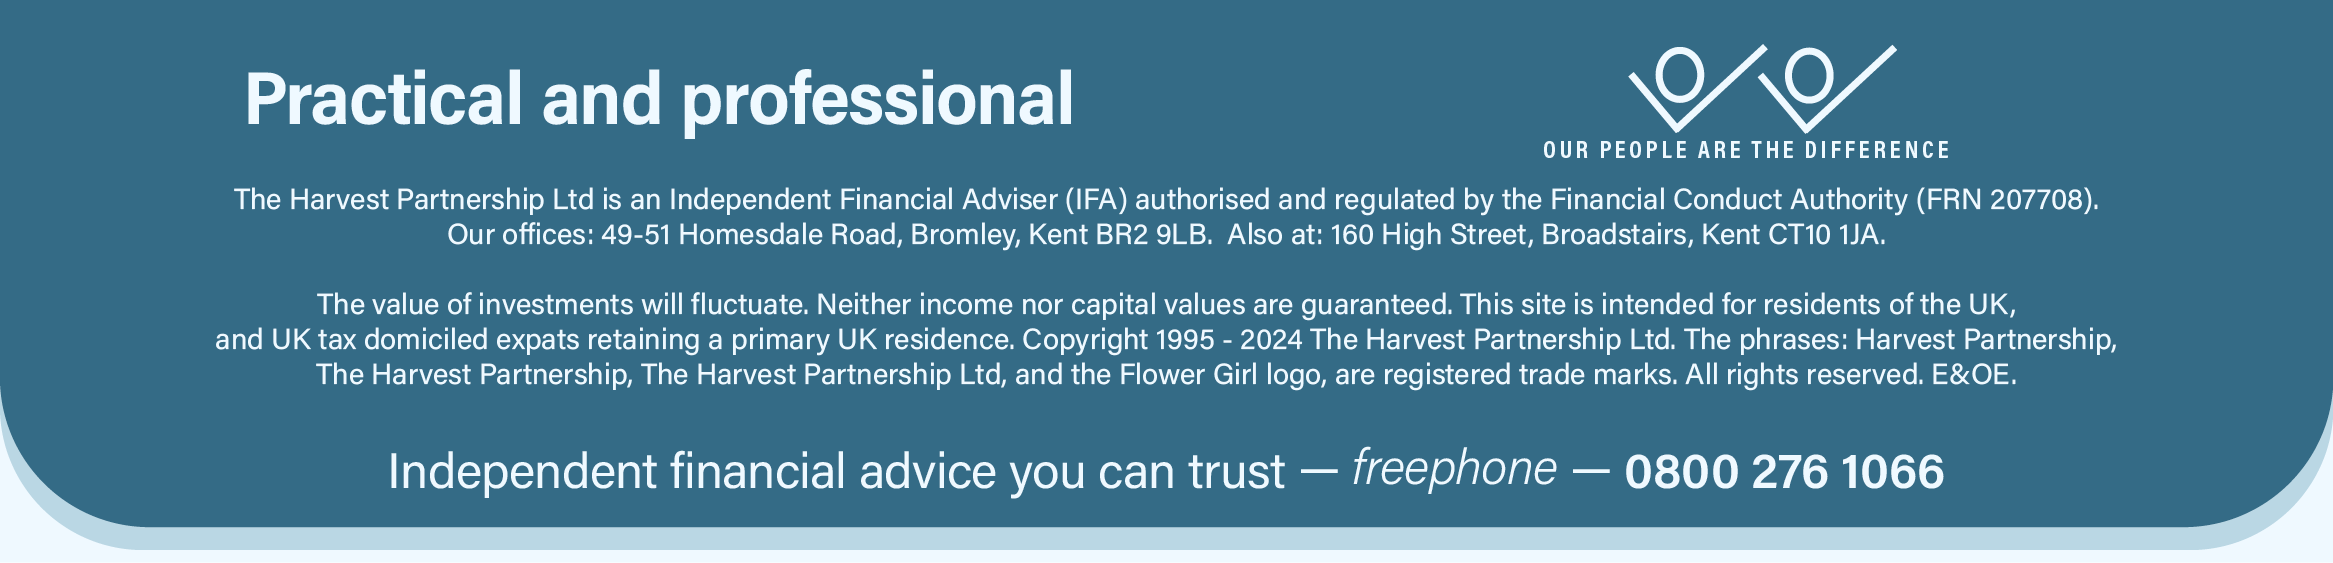 This image is the footer section with the following text: Practical and Professional. Our people are the difference. The Harvest Partnership Ltd is an Independent Financial Adviser (IFA) authorised and regulated by the Financial Conduct Authority (FRN 207708). Our offices: 49-51 Homesdale Road, Bromley, Kent BR2 9LB.  Also at: 160 High Street, Broadstairs, Kent CT10 1JA. The value of investments will fluctuate. Neither income nor capital values are guaranteed. This site is intended for residents of the UK, and UK tax domiciled expats retaining a primary UK residence. Copyright 1995 - 2024 The Harvest Partnership Ltd. The phrases: ‘Harvest Partnership’, ‘The Harvest Partnership’, ‘The Harvest Partnership Ltd’, and the ‘Flower Girl’ logo, are registered trade marks. All rights reserved. E&OE. Your source for independent financial advice you can trust: 0800 276 1066